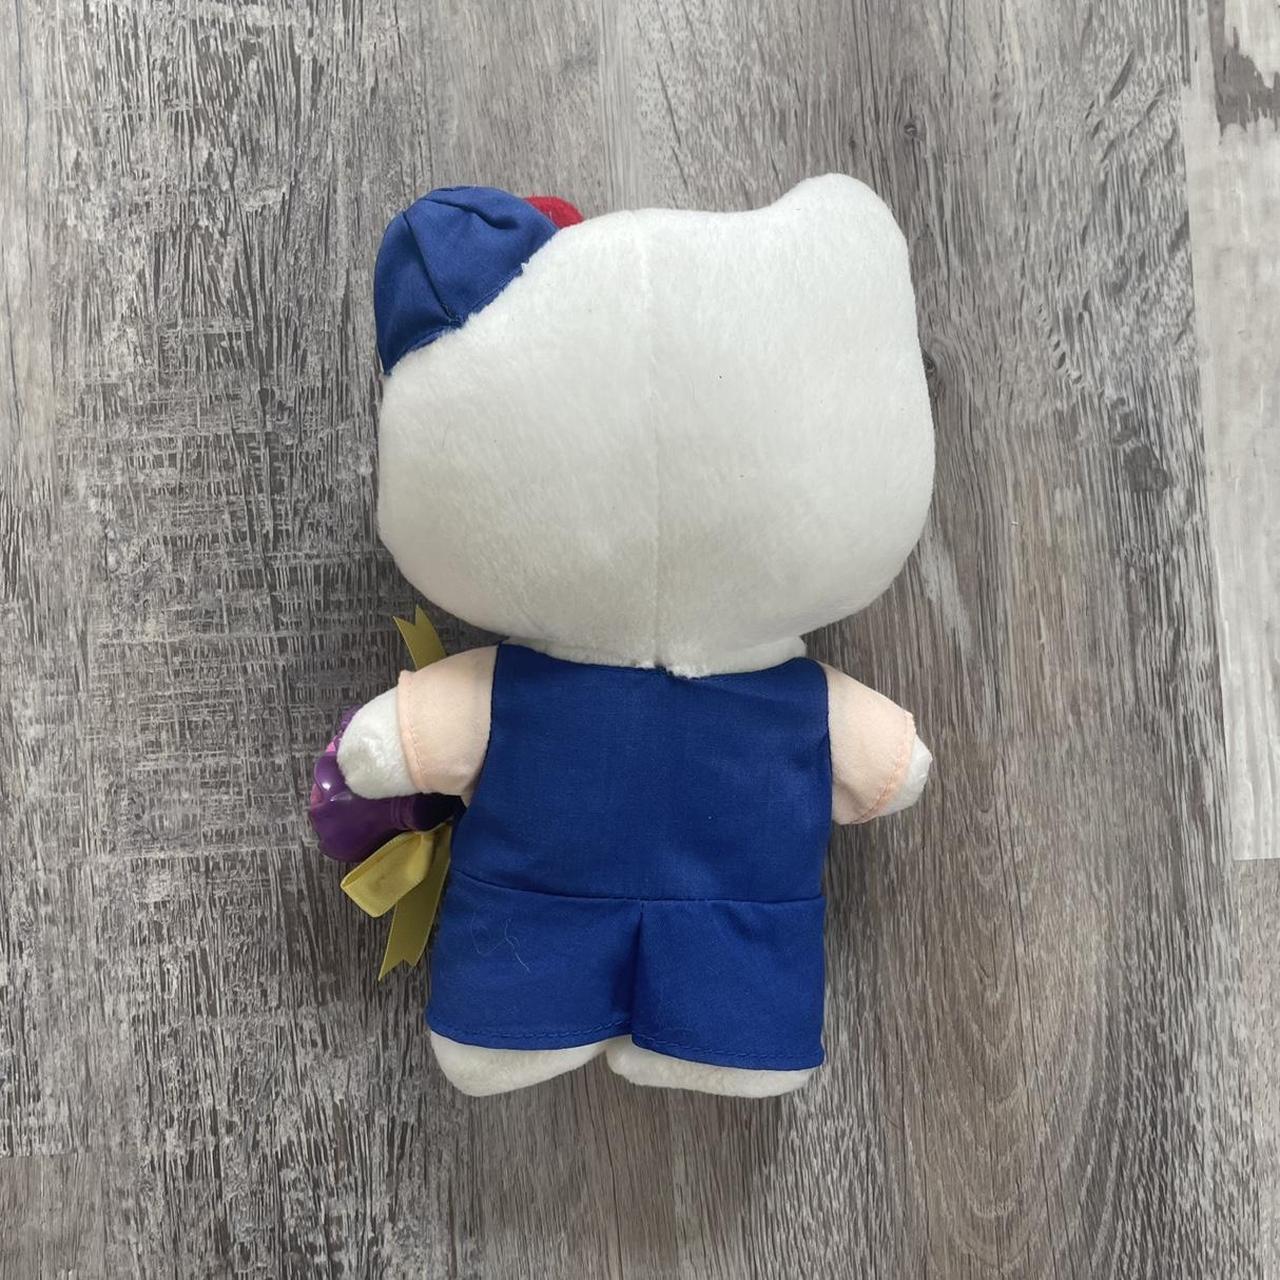 Sanrio Blue and Red Stuffed-animals | Depop